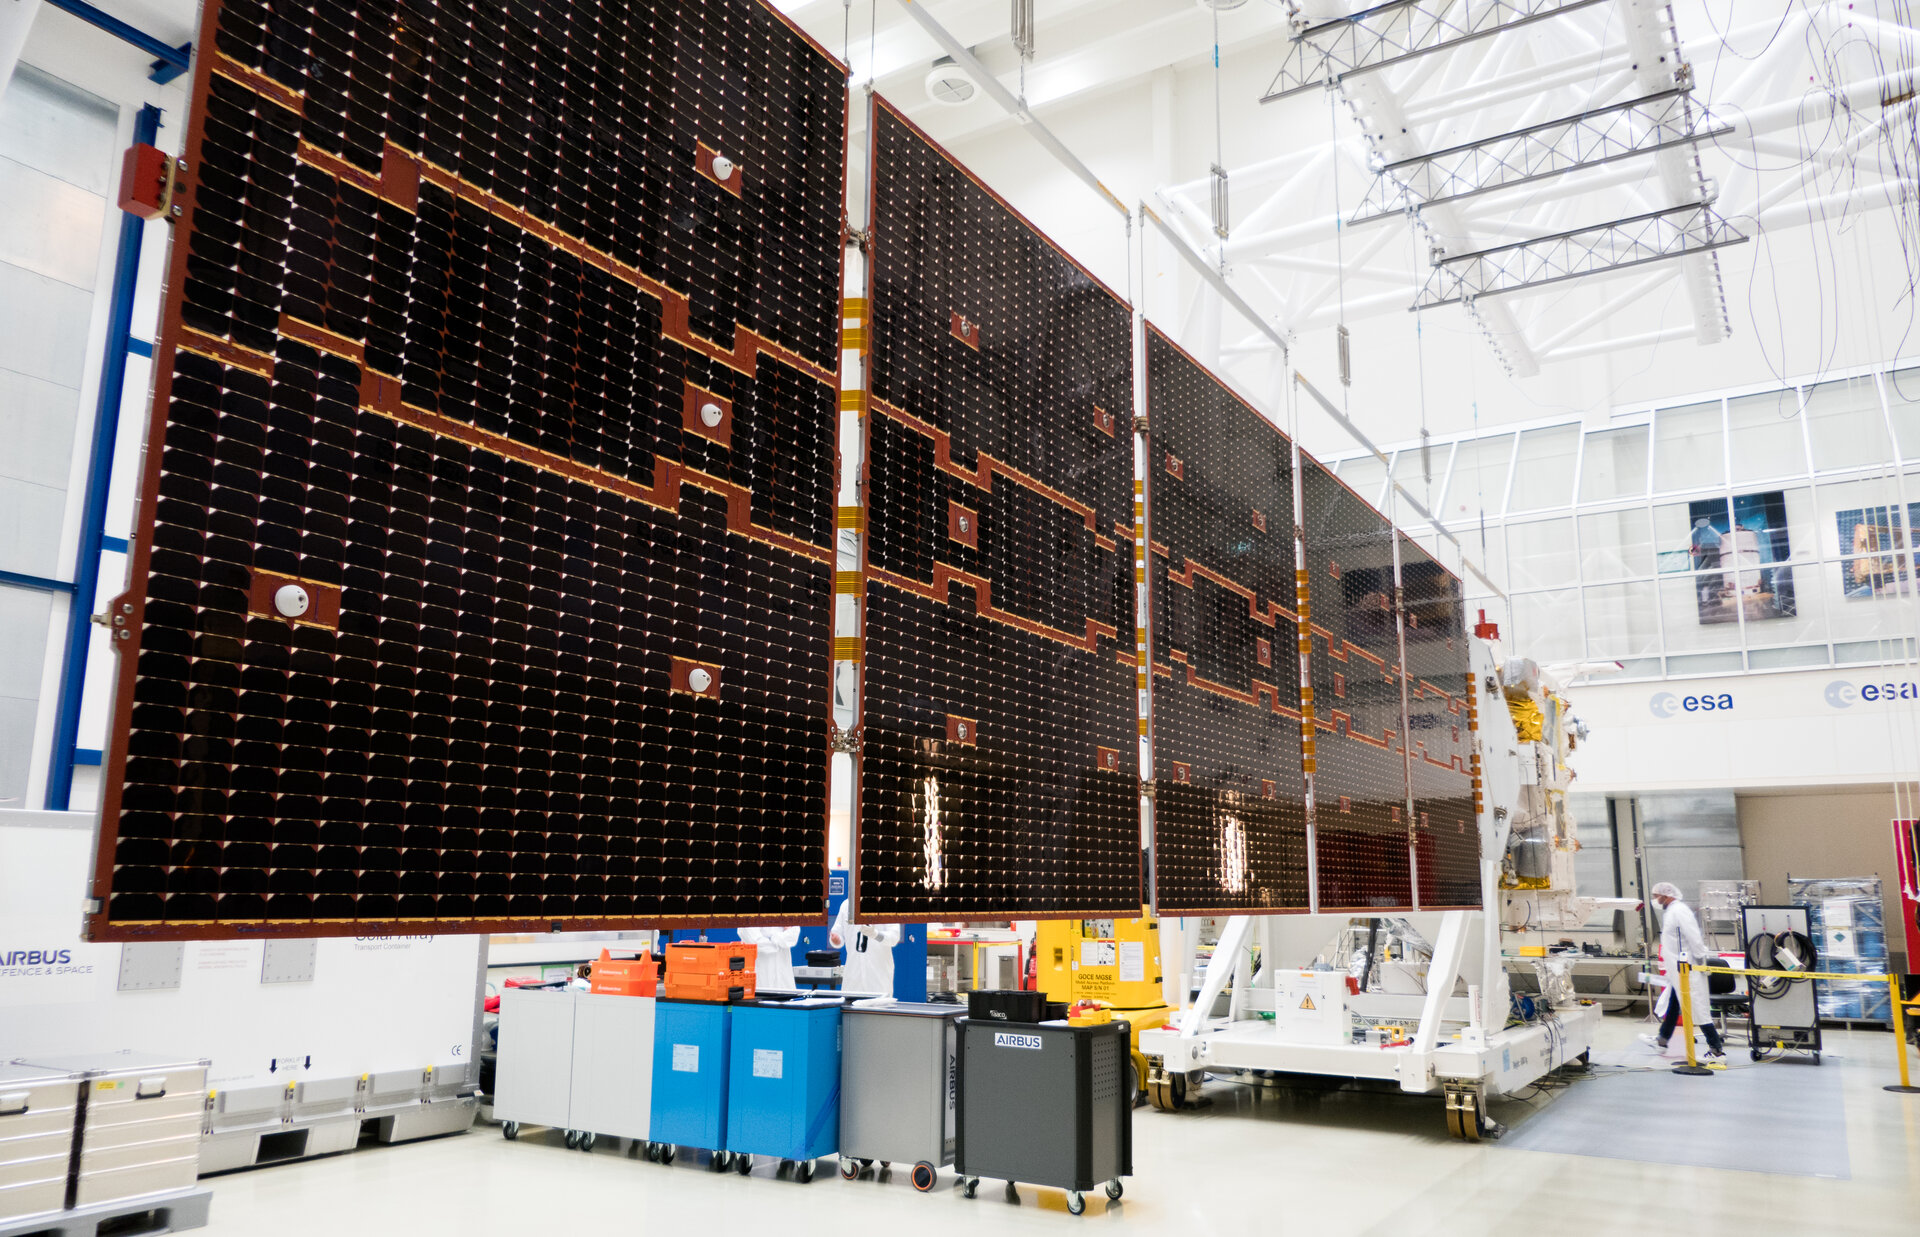 See enormous solar panels of this Earth-monitoring satellite